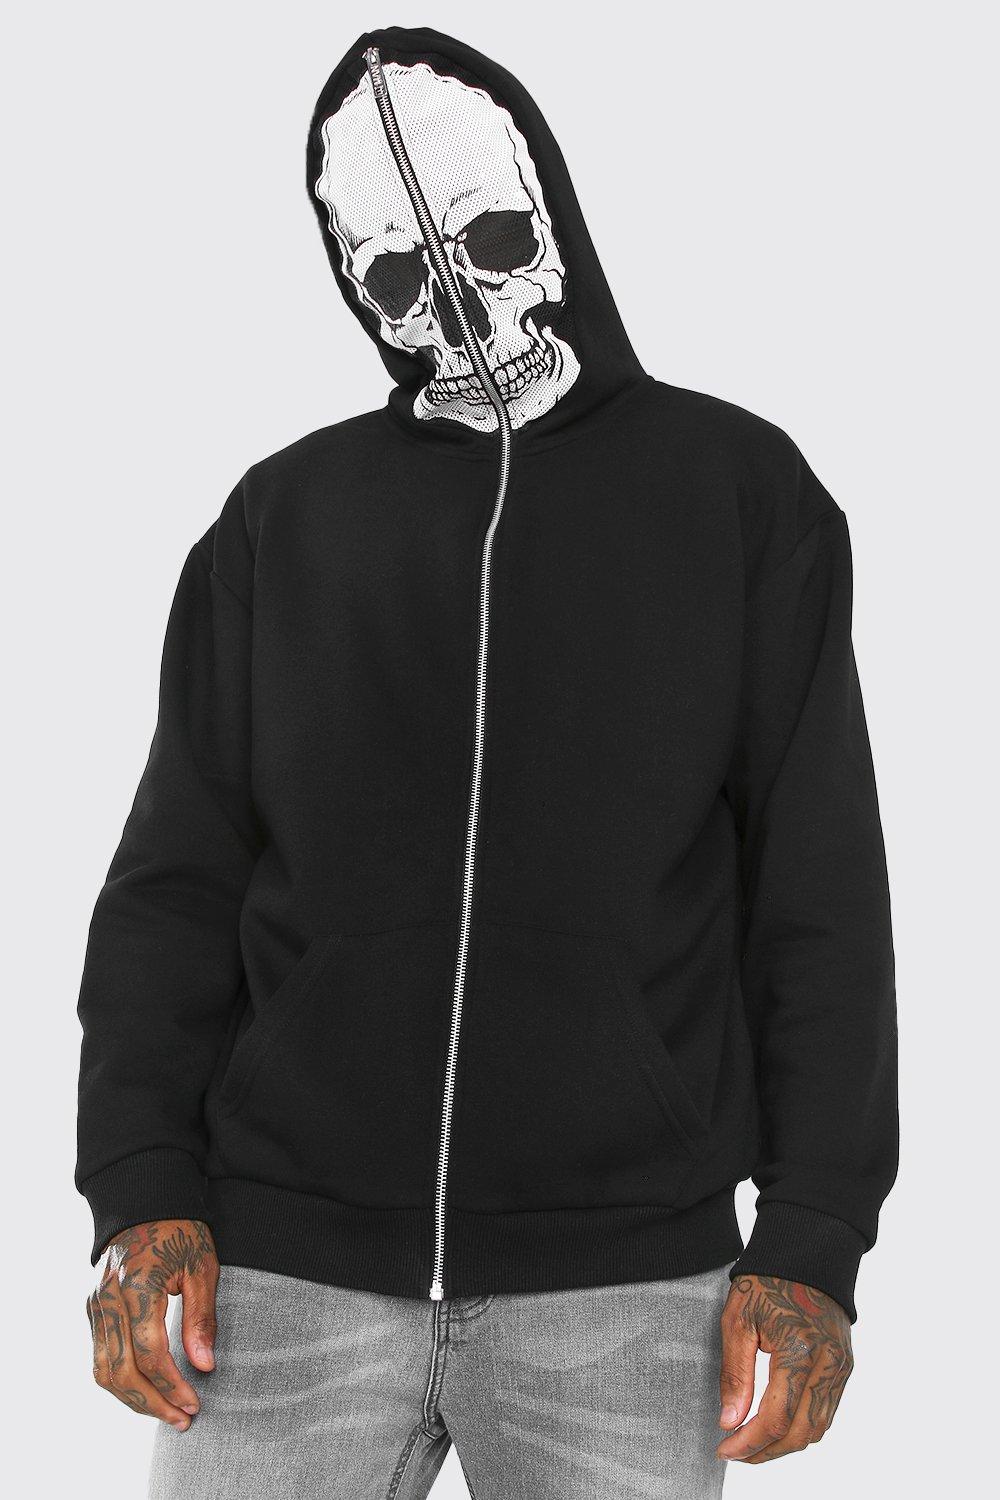 hoodie over face